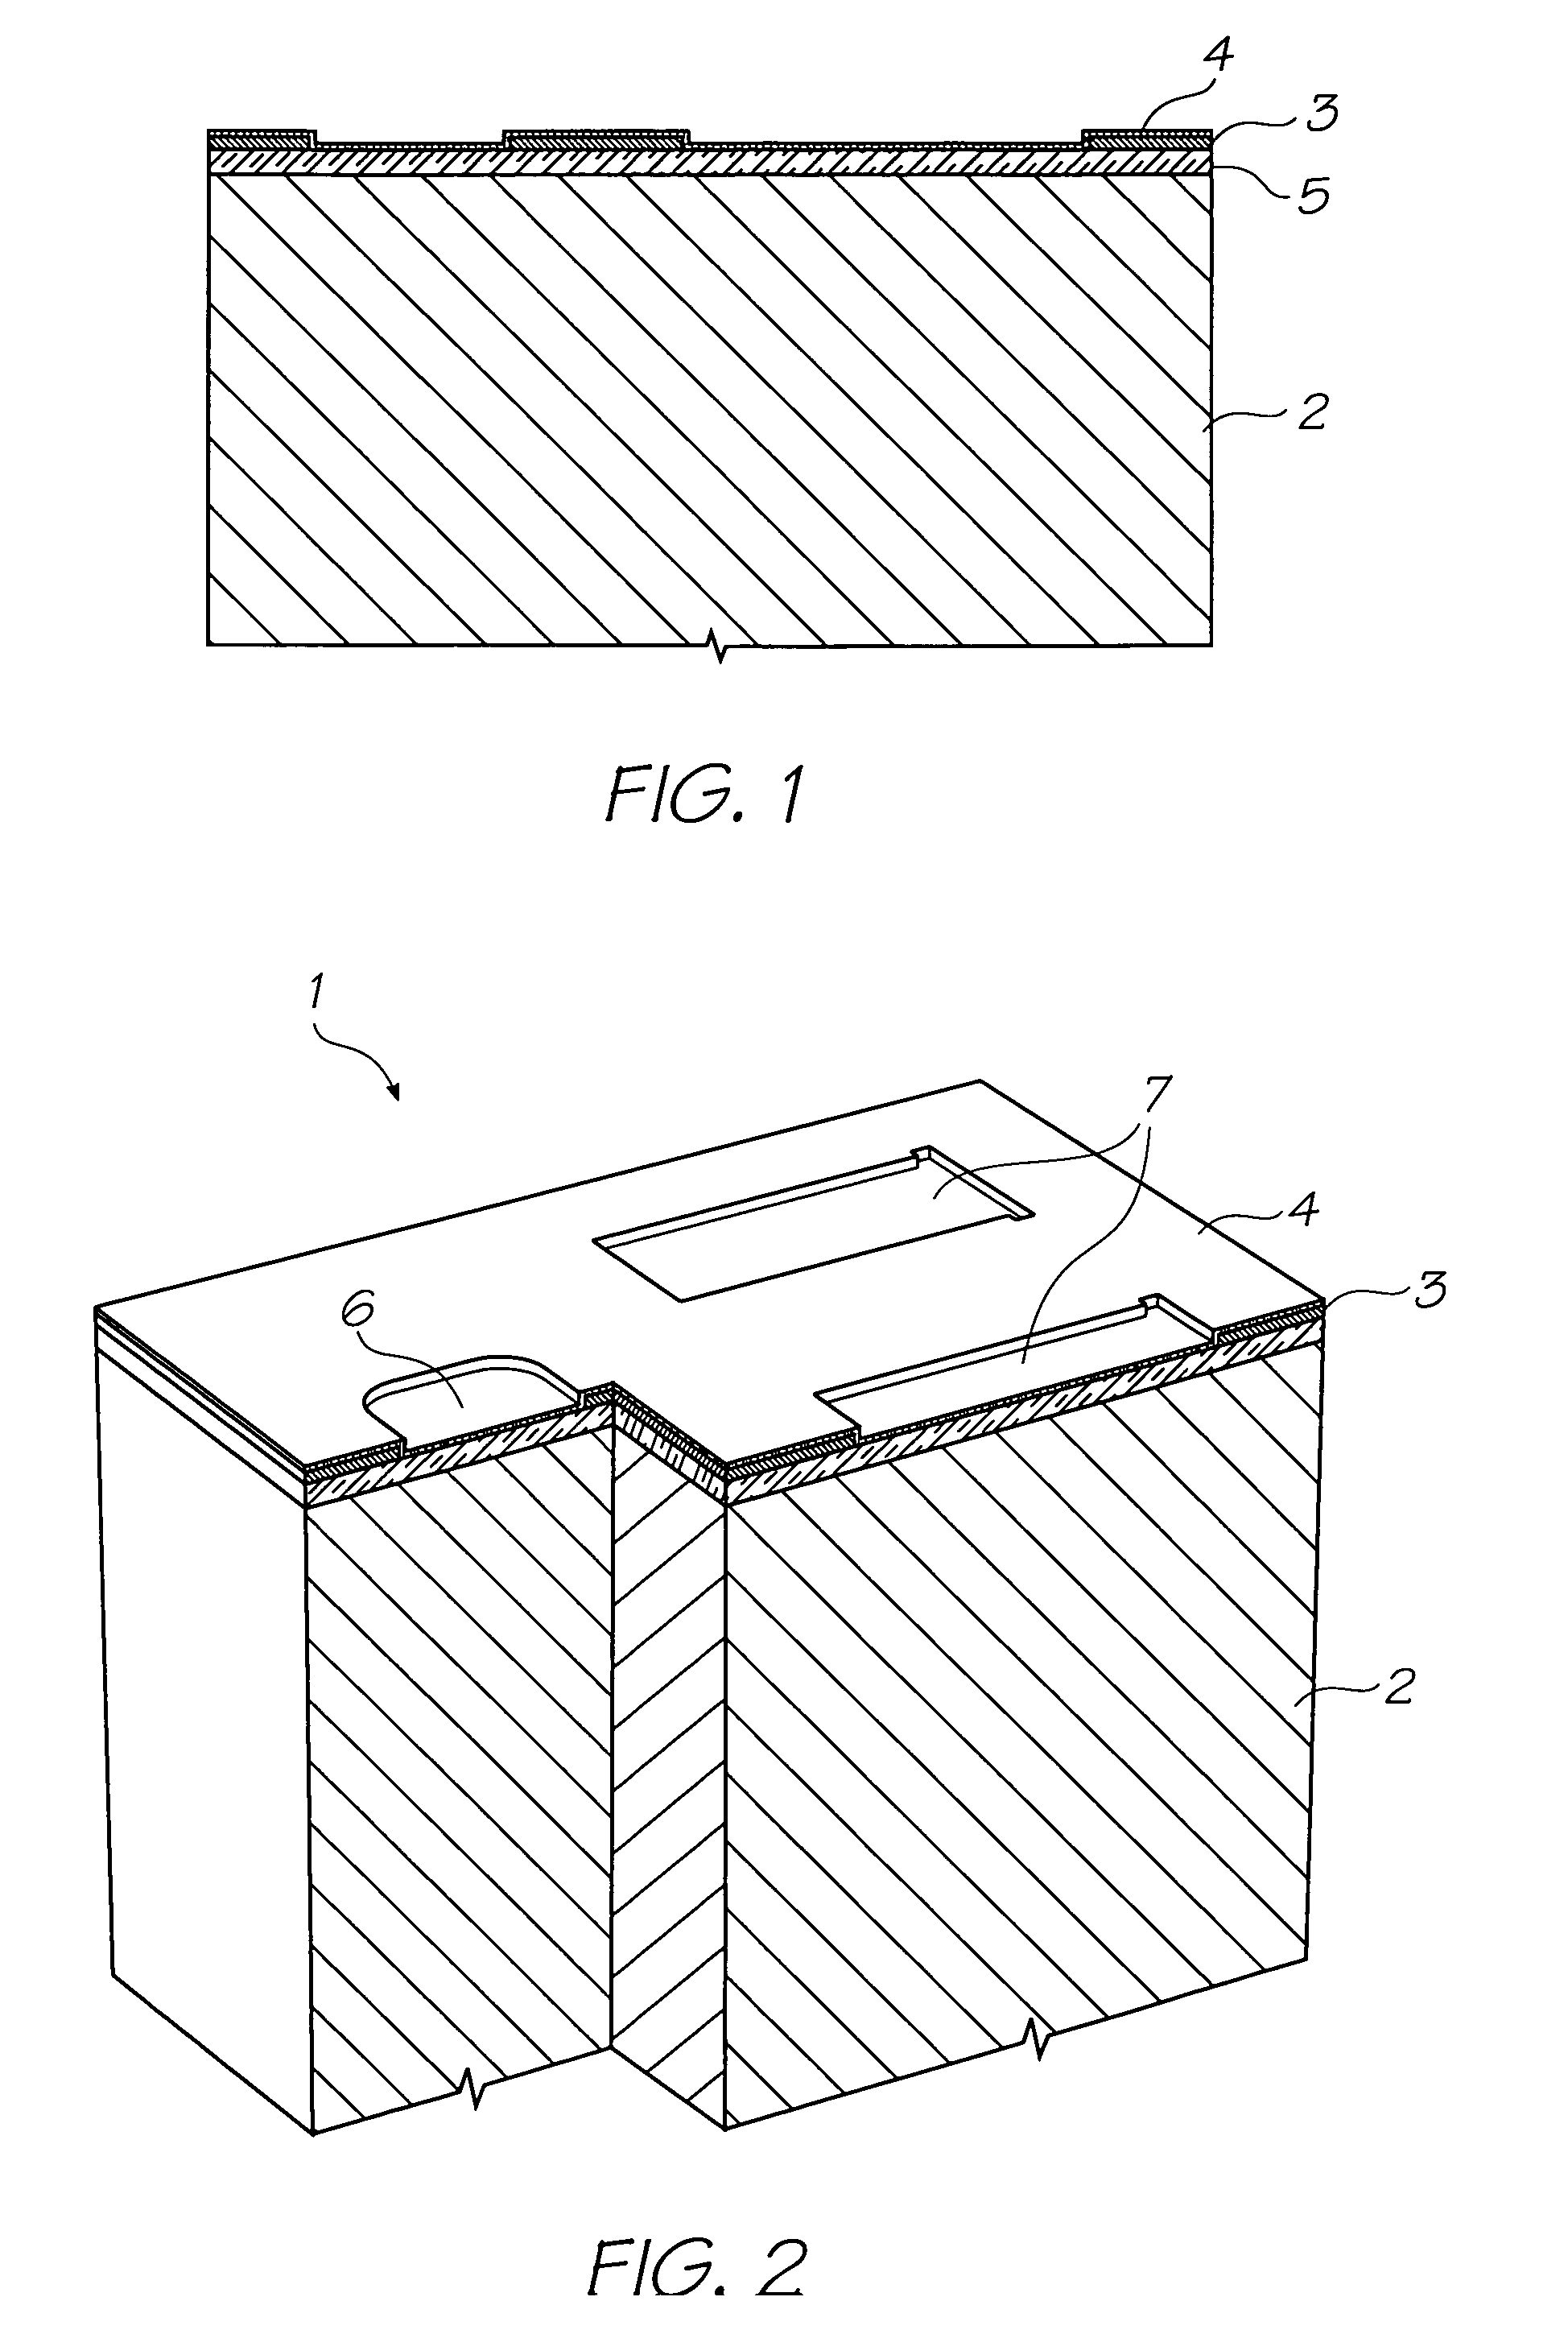 Method of fabricating inkjet nozzles having associated ink priming features